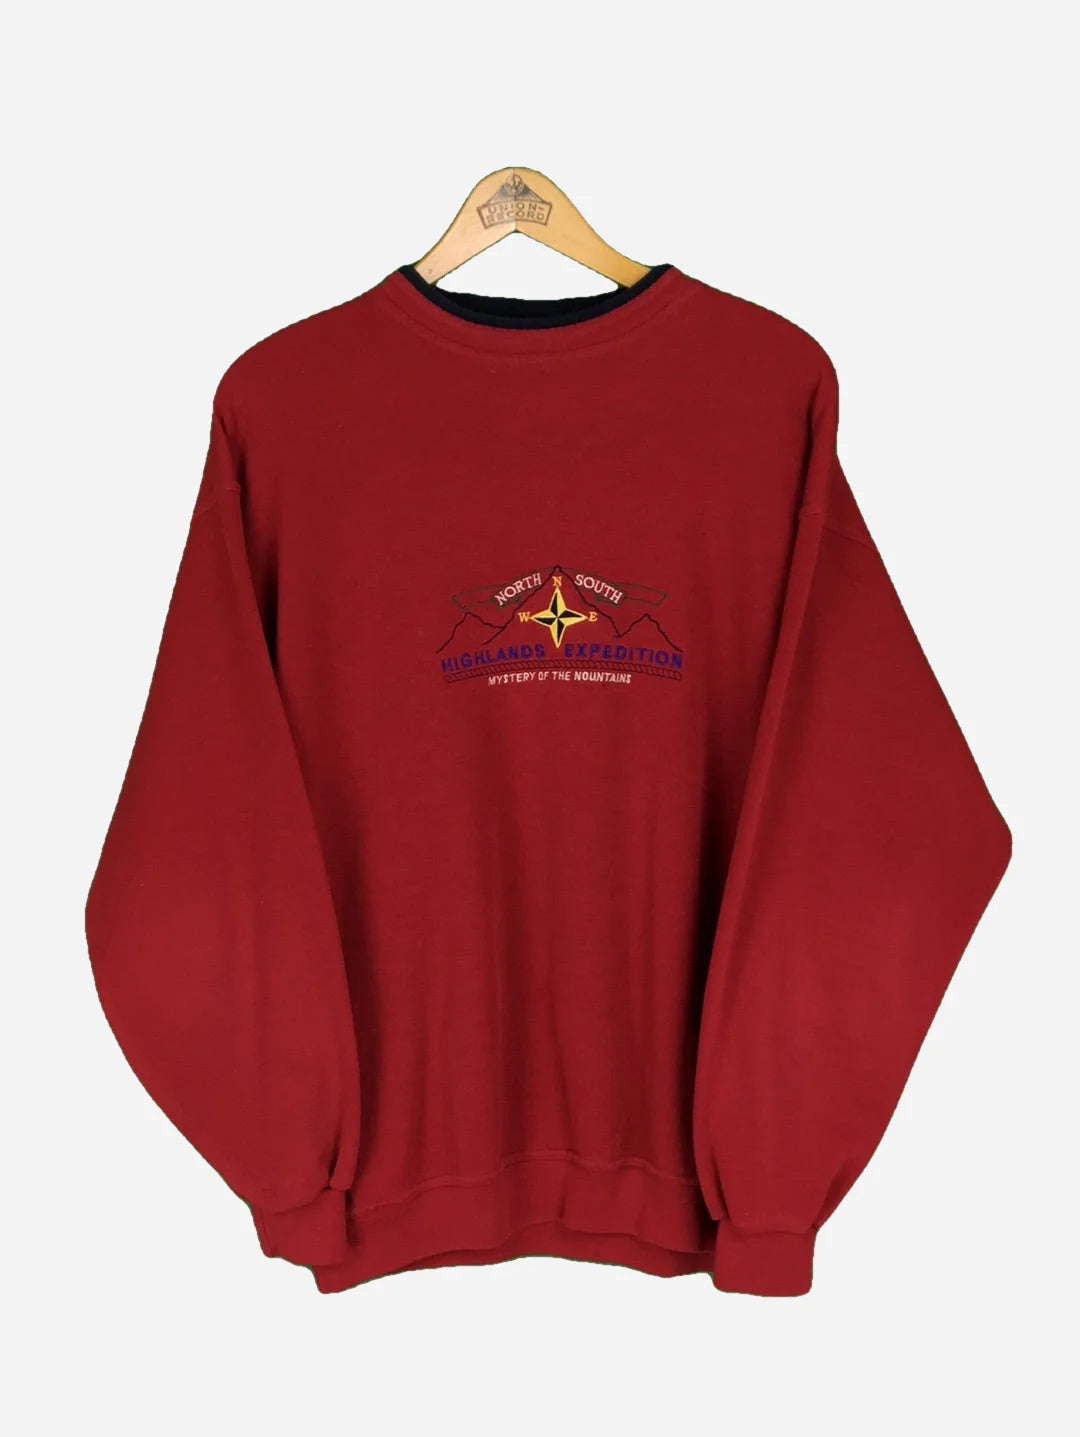 „Highlands Expedition“ Sweater (XL)